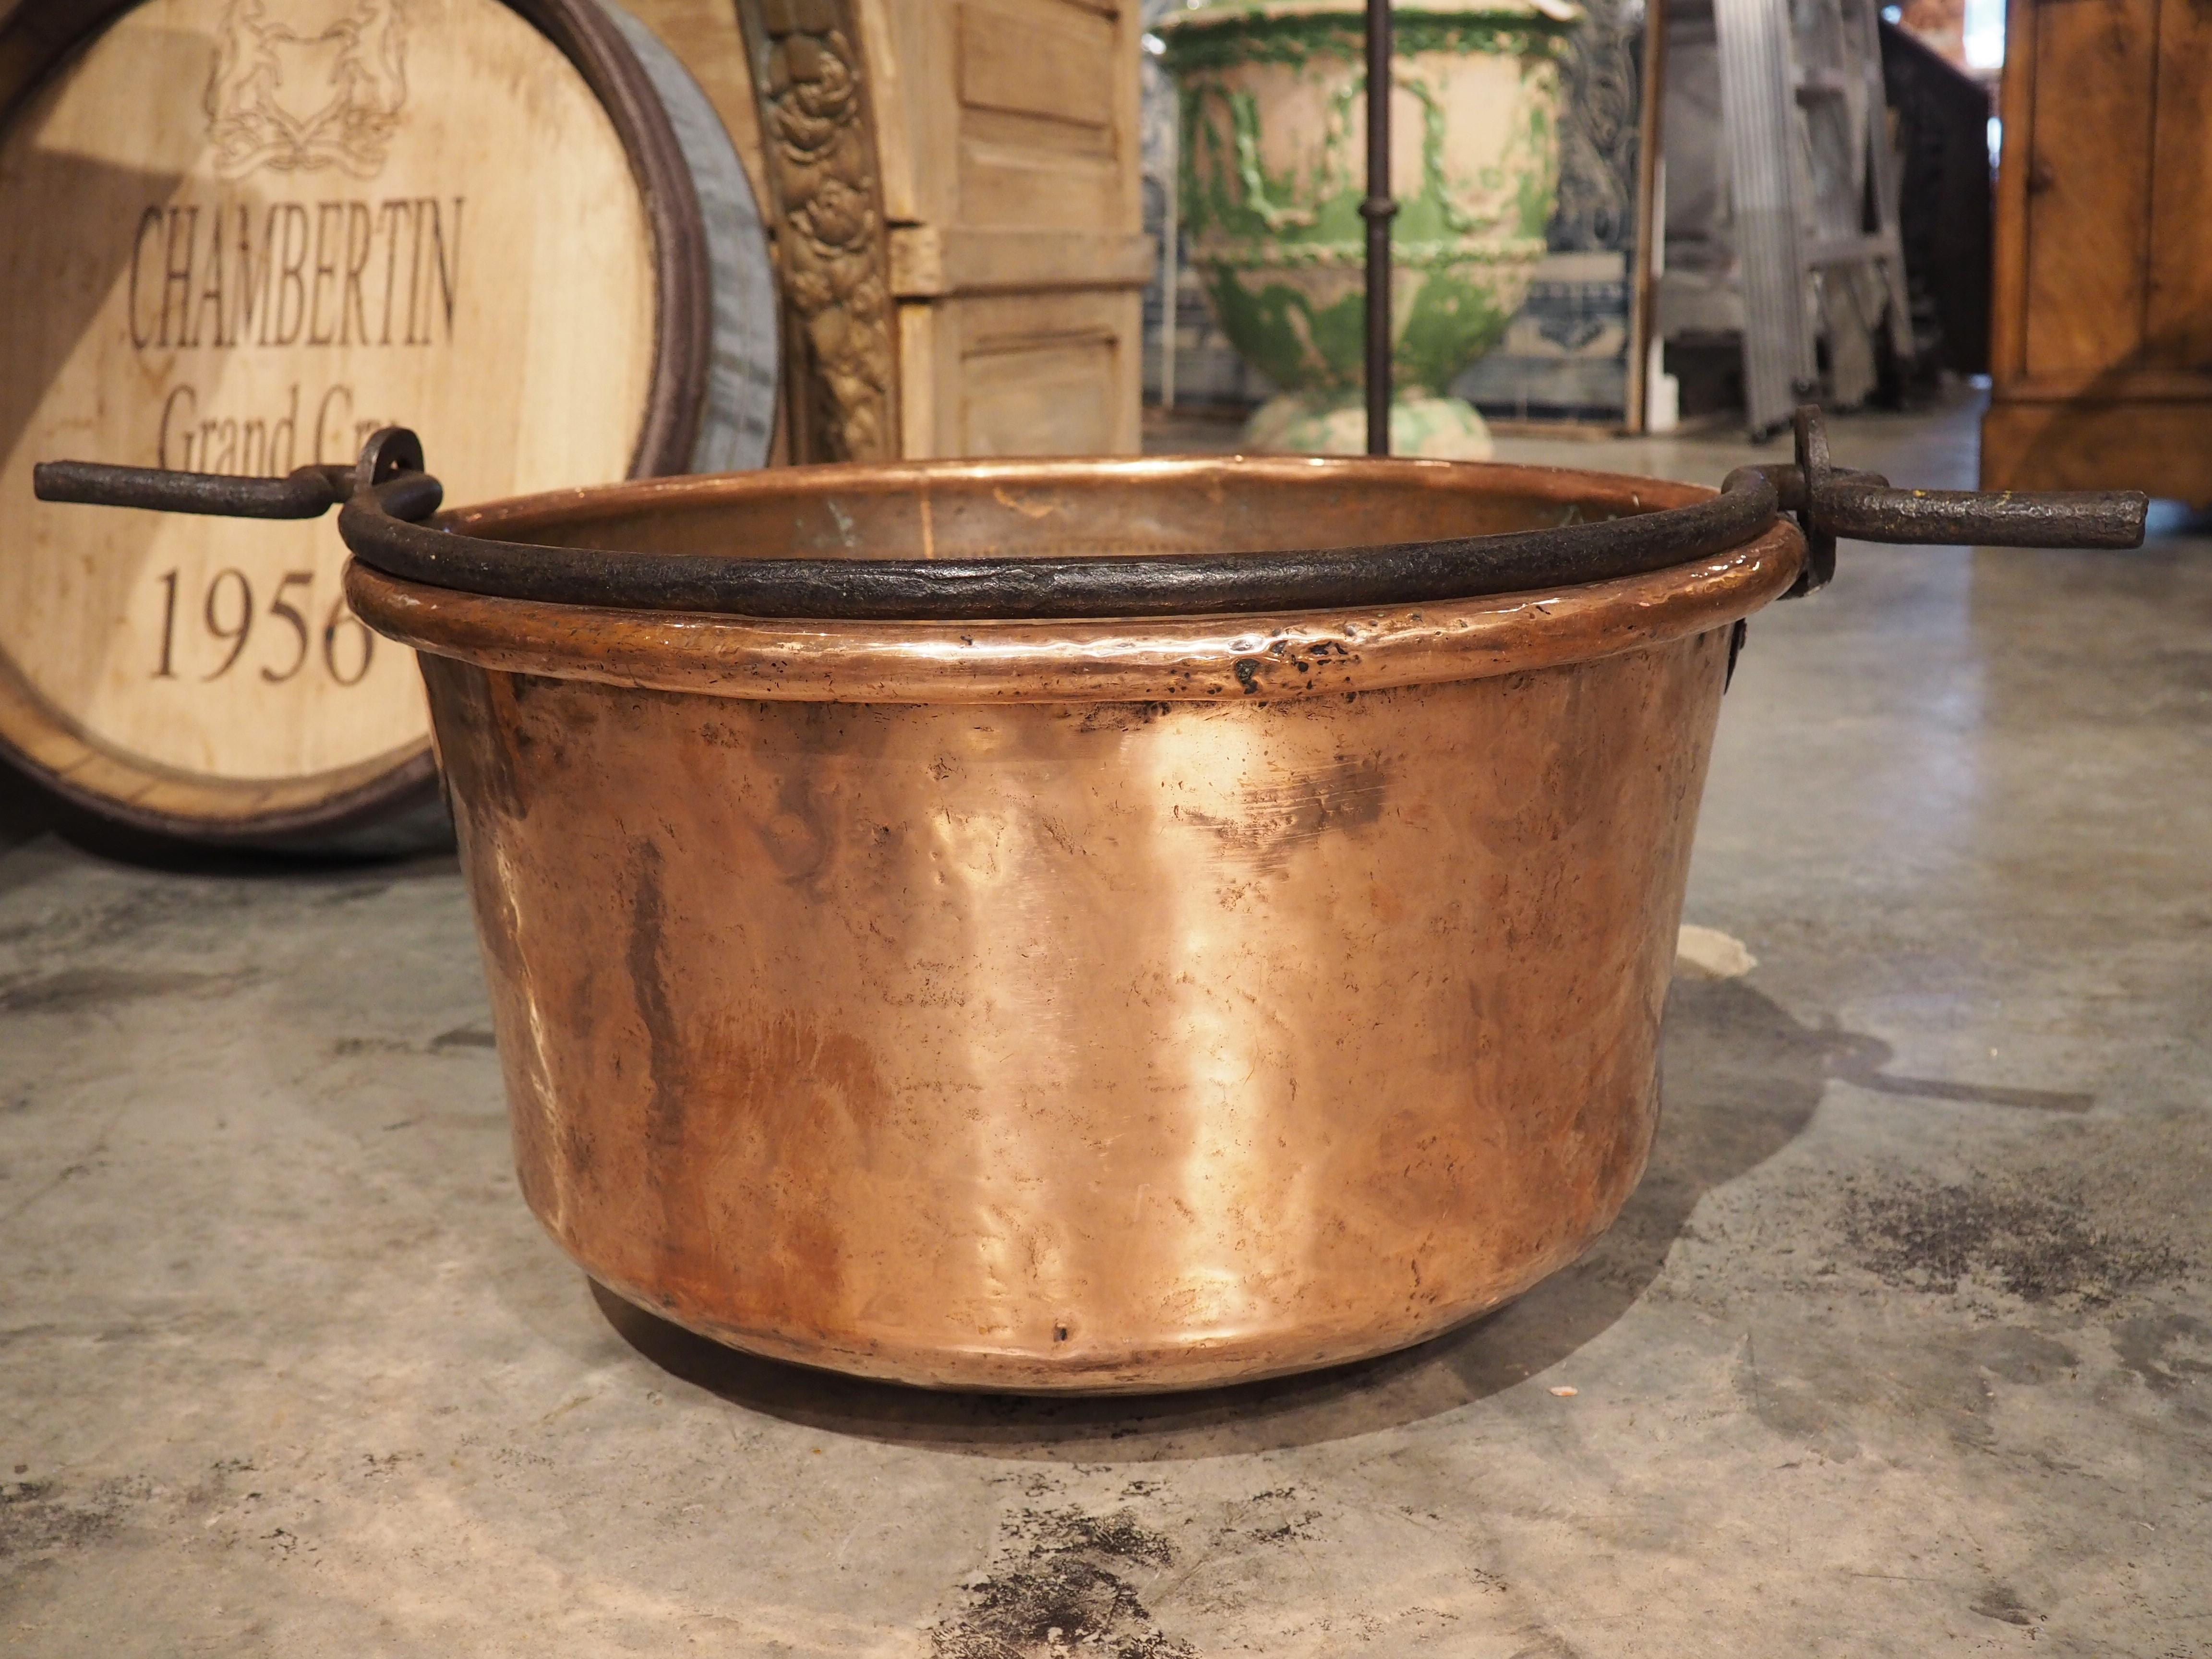 Antique Polished Copper Chaudron or Wine Cooler, Wrought Iron Handle, circa 1850 For Sale 3